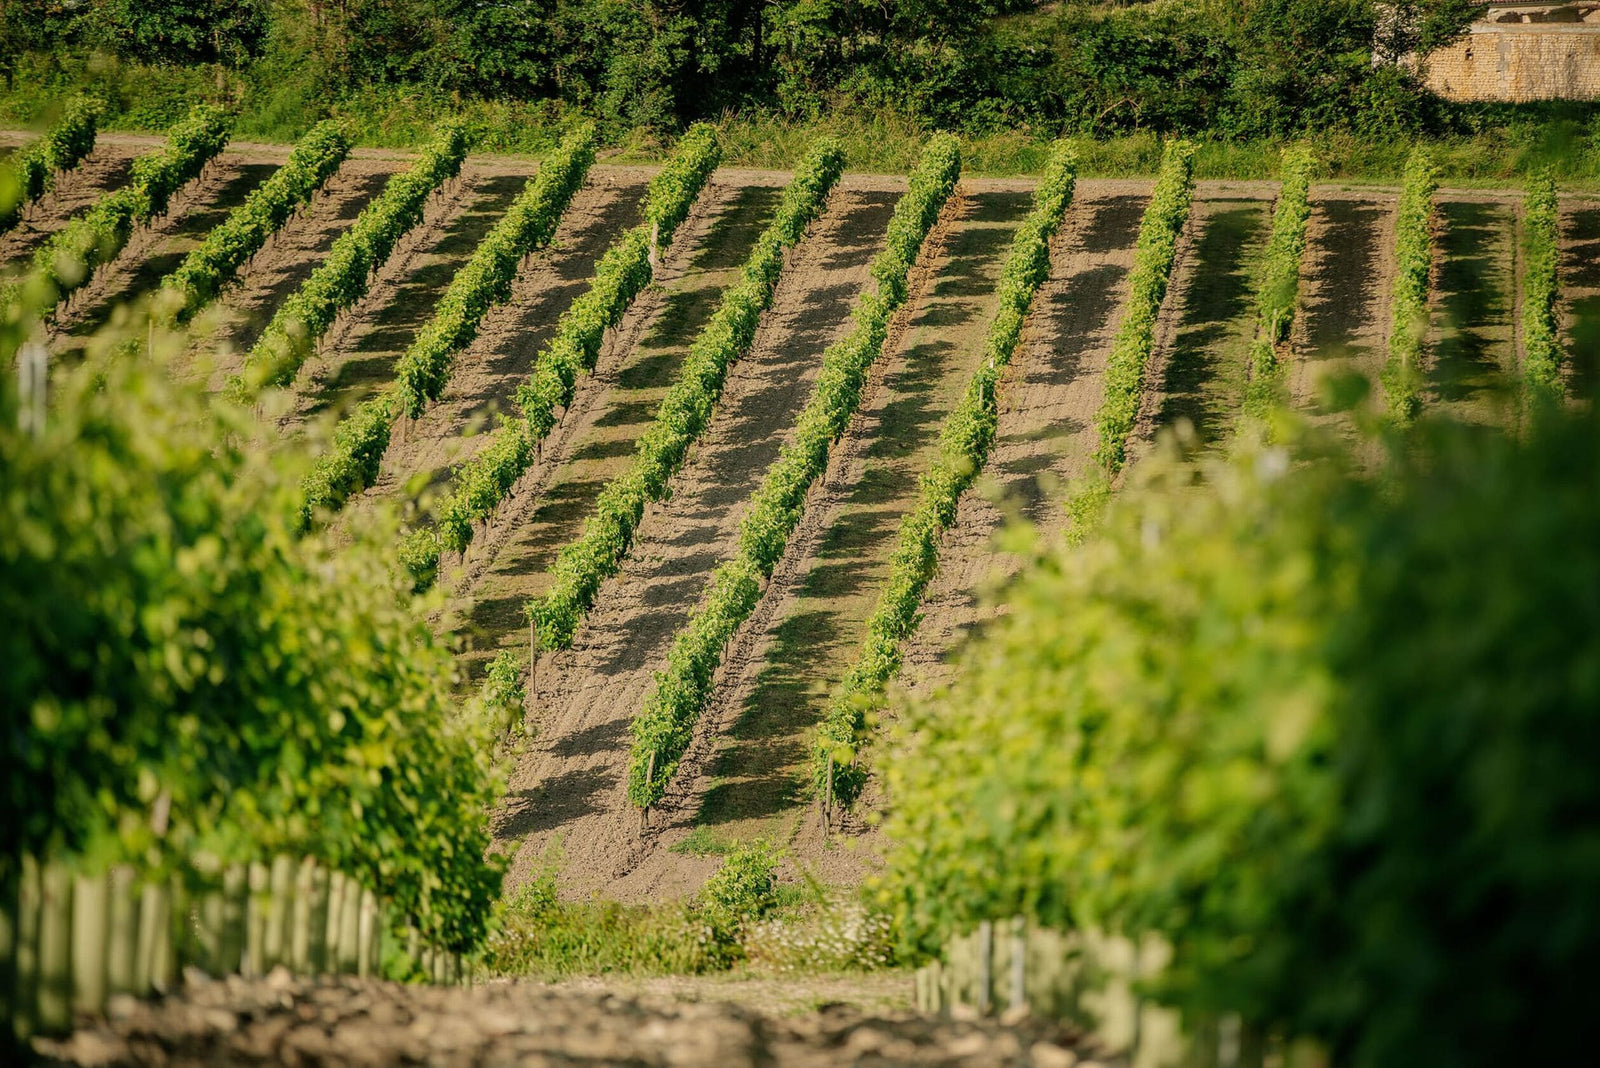 A zoom on a wineyard